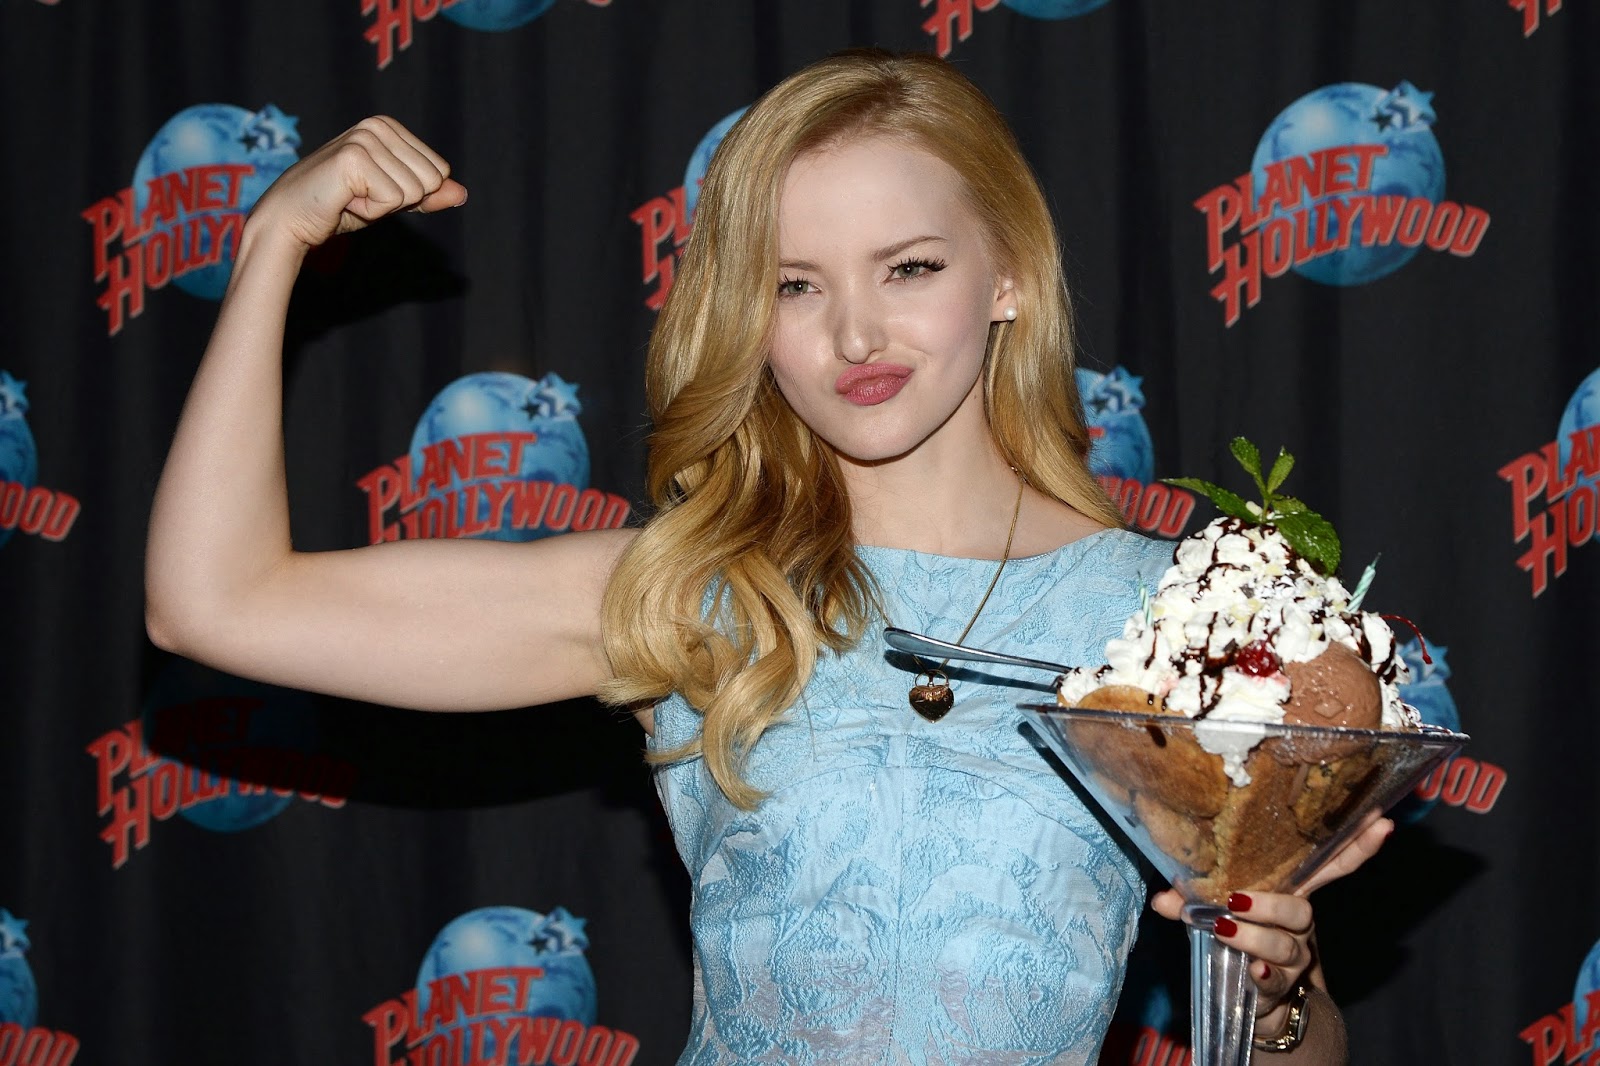 Dove Cameron Celebrates Her Birthday In Light Beautiful Blue Dress At Planet Hollywood In Times